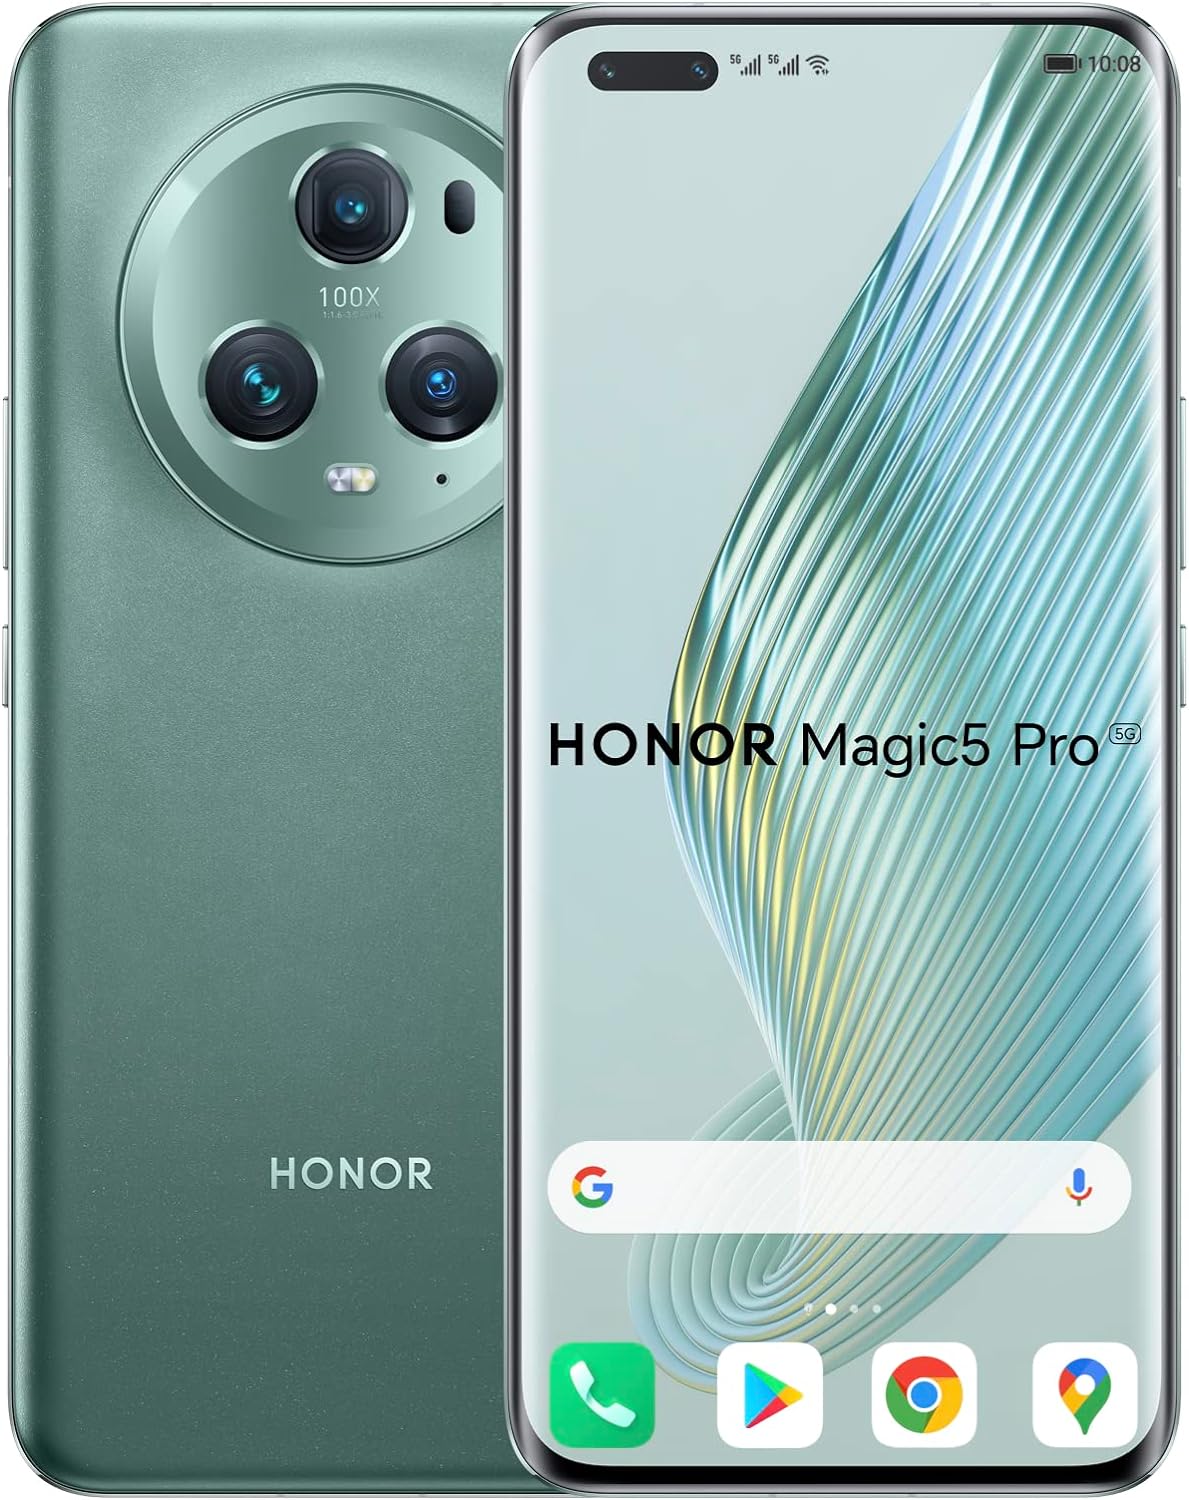 Honor Magic 5 Pro Review: Unleashing Power and Innovation